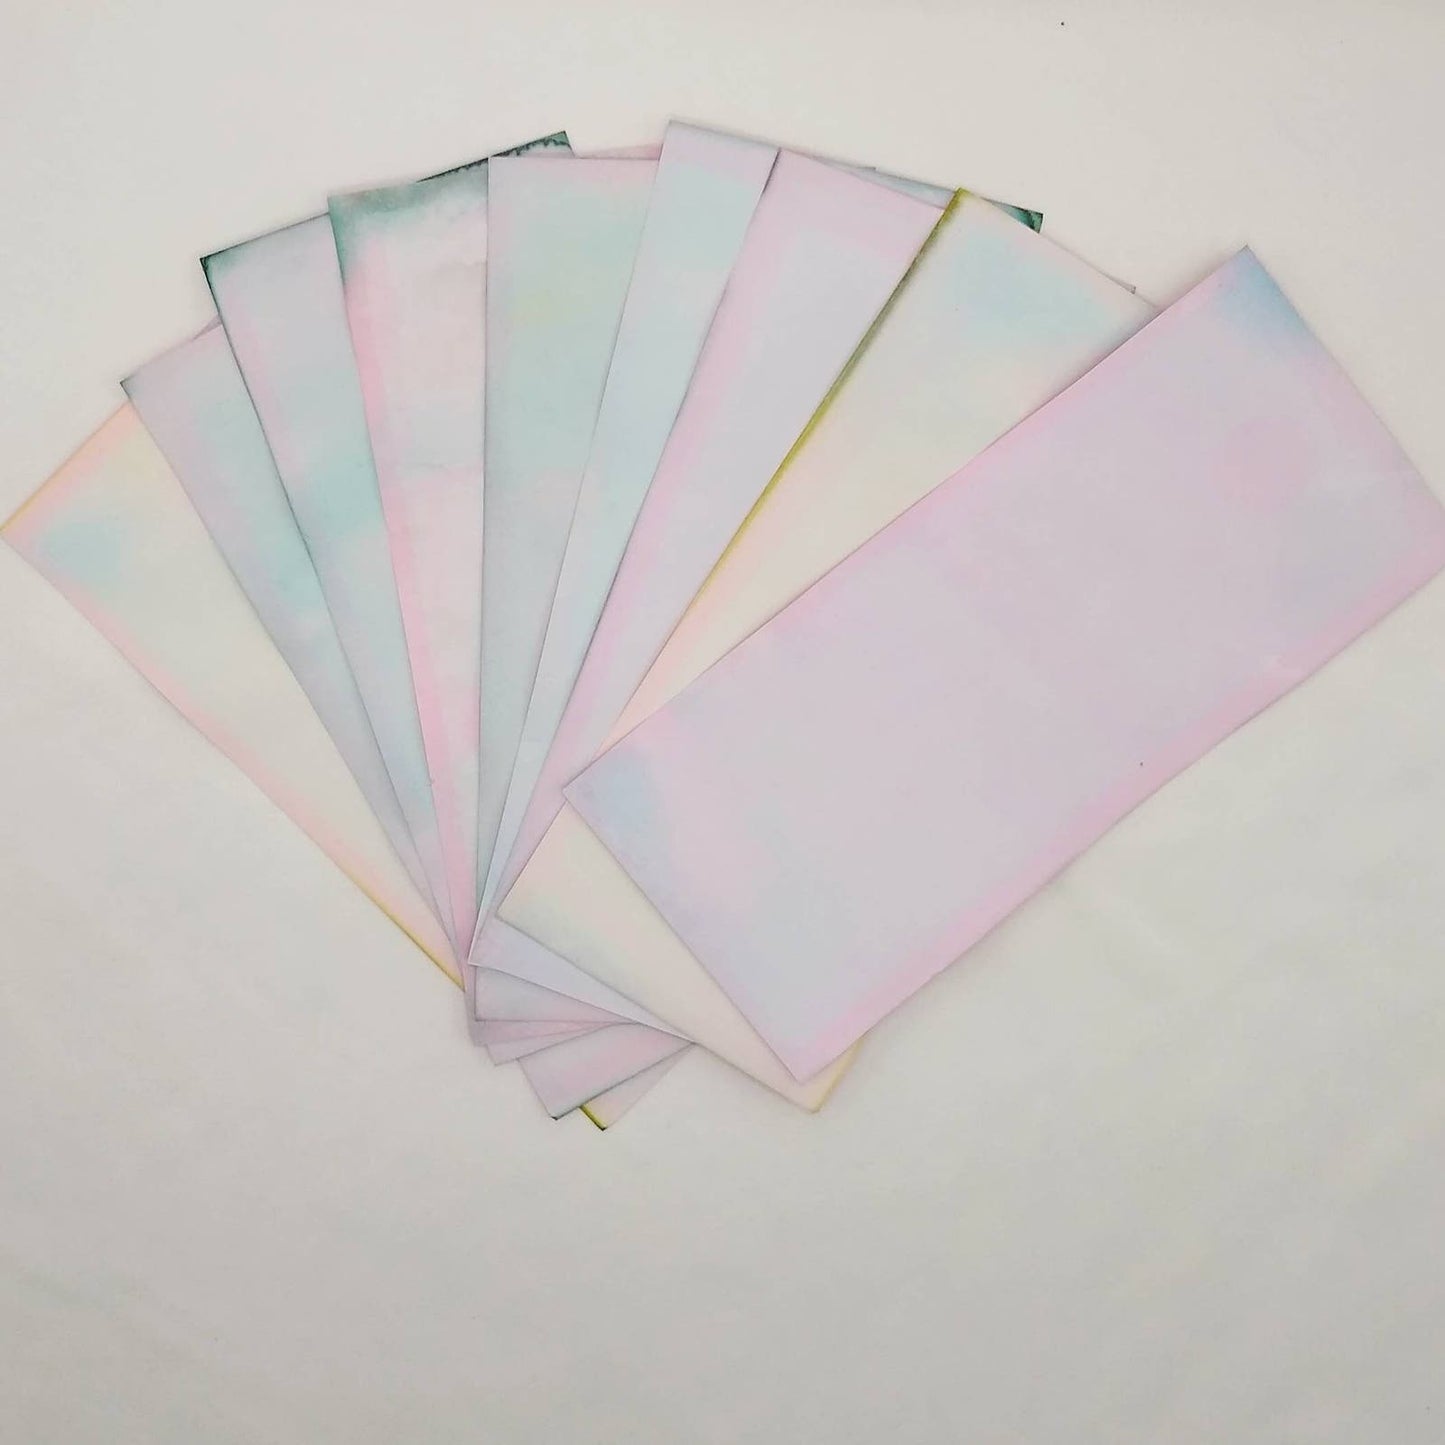 Dyed Paper Variety Pack, Pastel Dyed Paper, Hand Dyed Paper, Junk Journal Supply